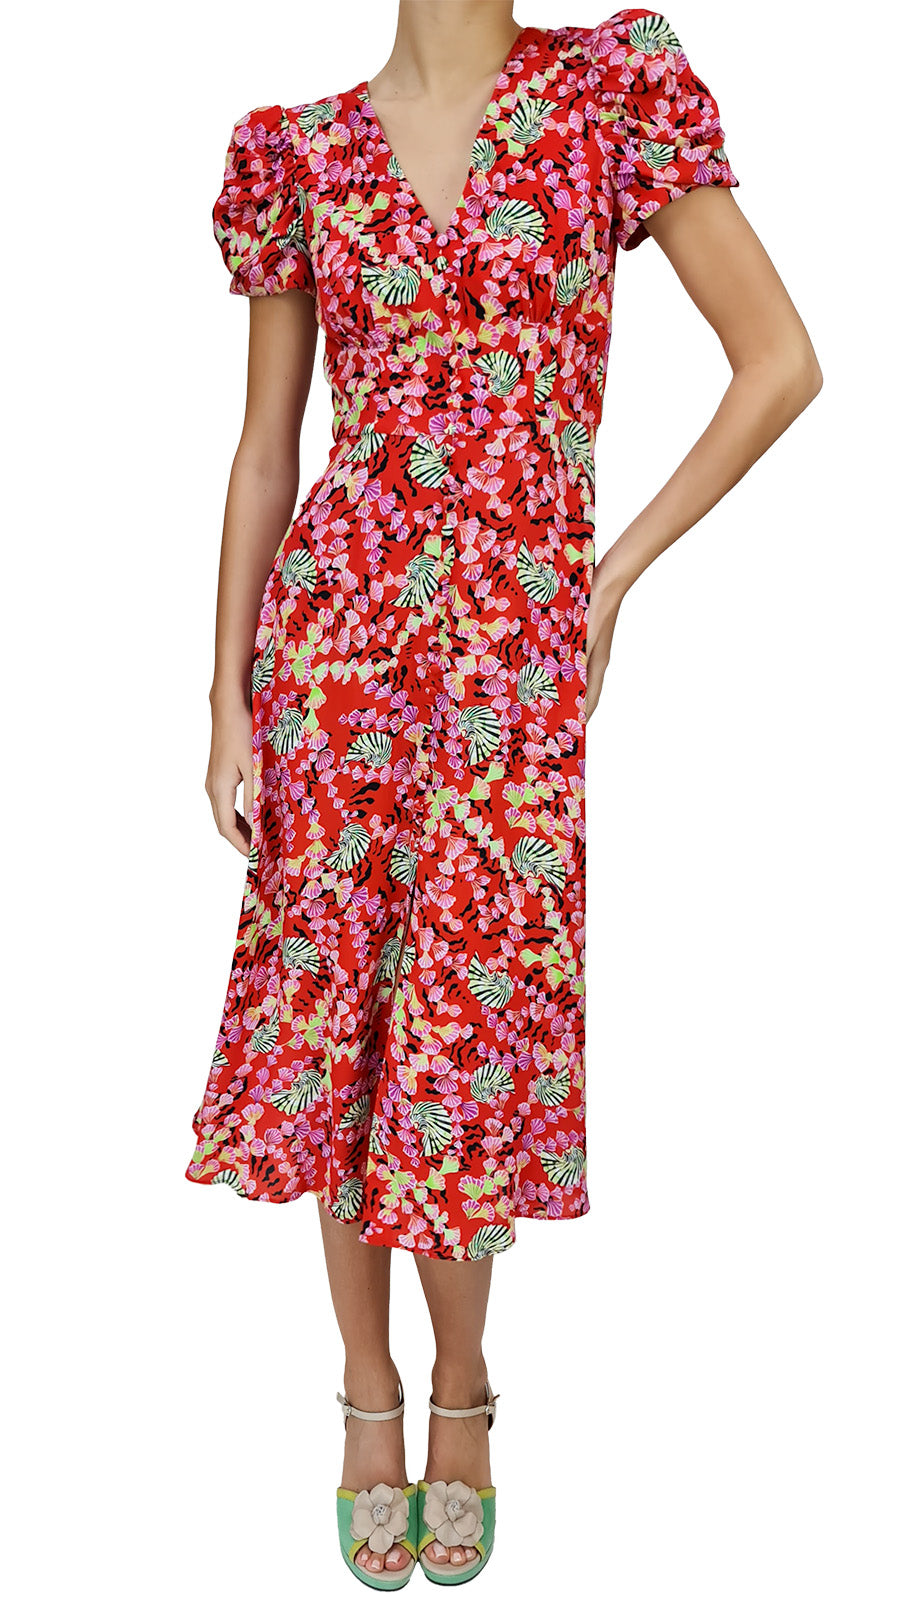 Every wardrobe needs a go-to flowery dress, and this Saloni dress is the ultimate choice for all manner of sartorial occasions. A vivid print of cascading shells and sun-kissed fiery rouge ripples. Classic in feel but contemporary in silhouette, this midi-length dress features an elegant V-neckline at the front and back, with puffed sleeves that add a sculptural feel, and soft gathers around the bust. 